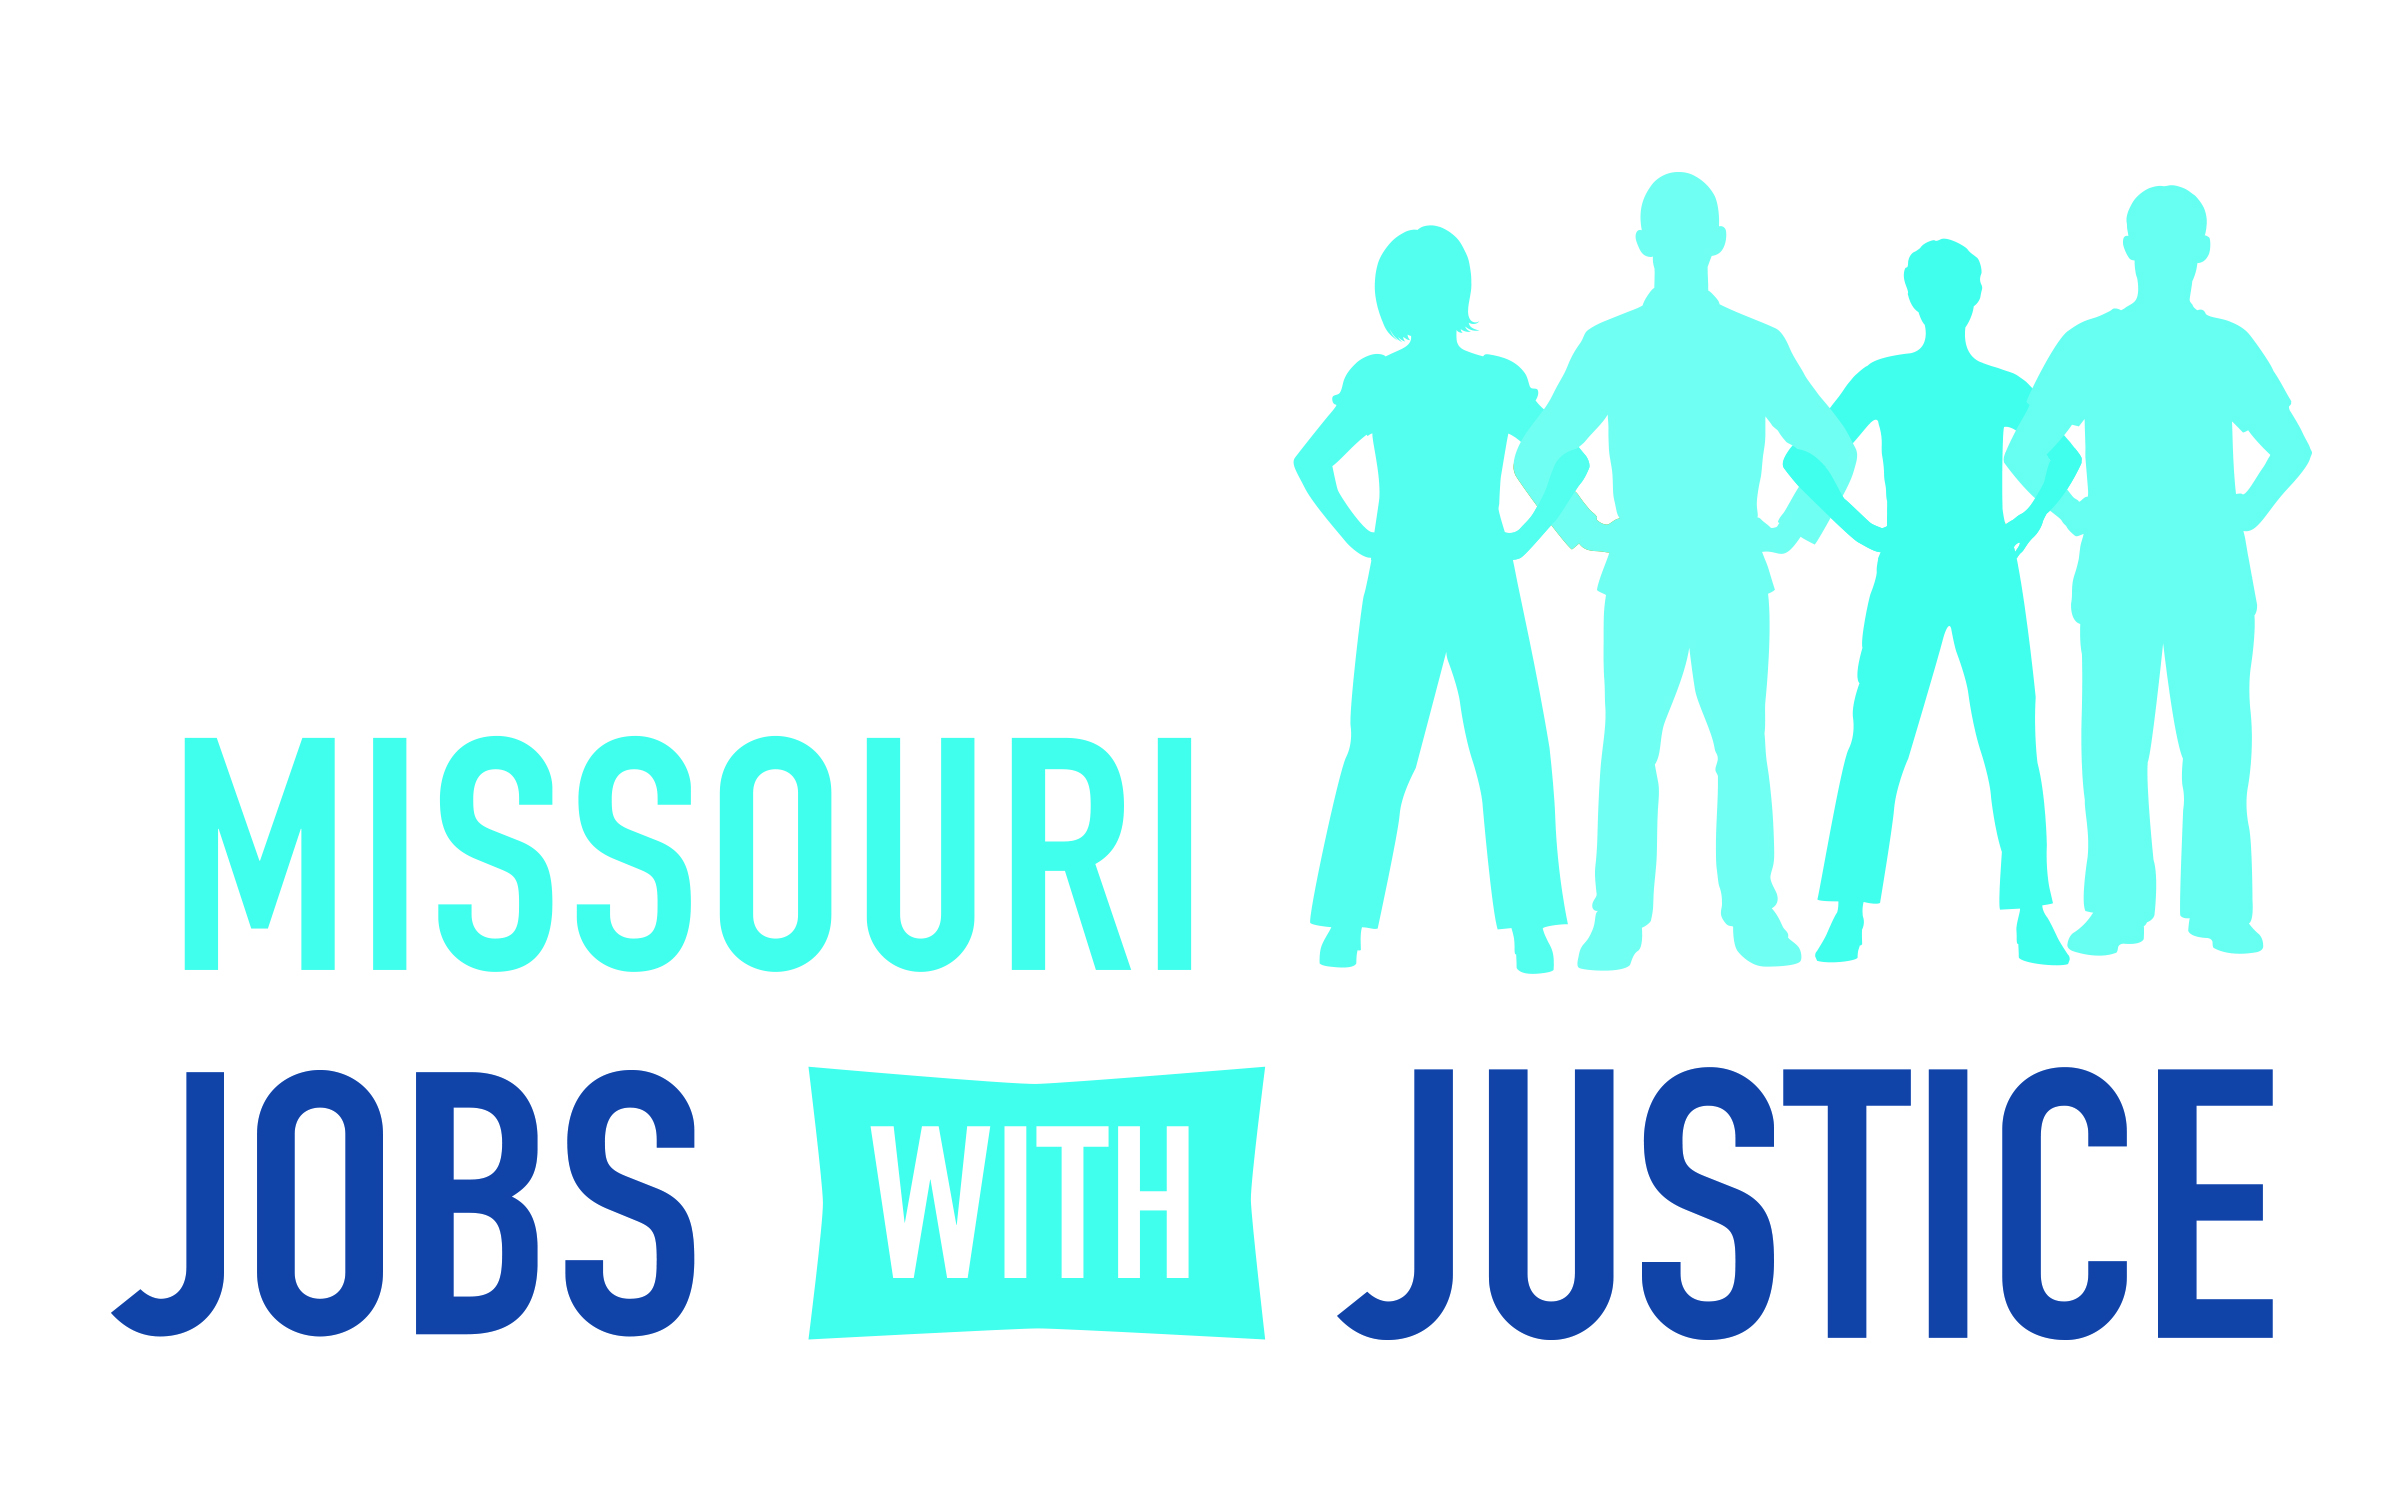 Missouri Jobs with Justice